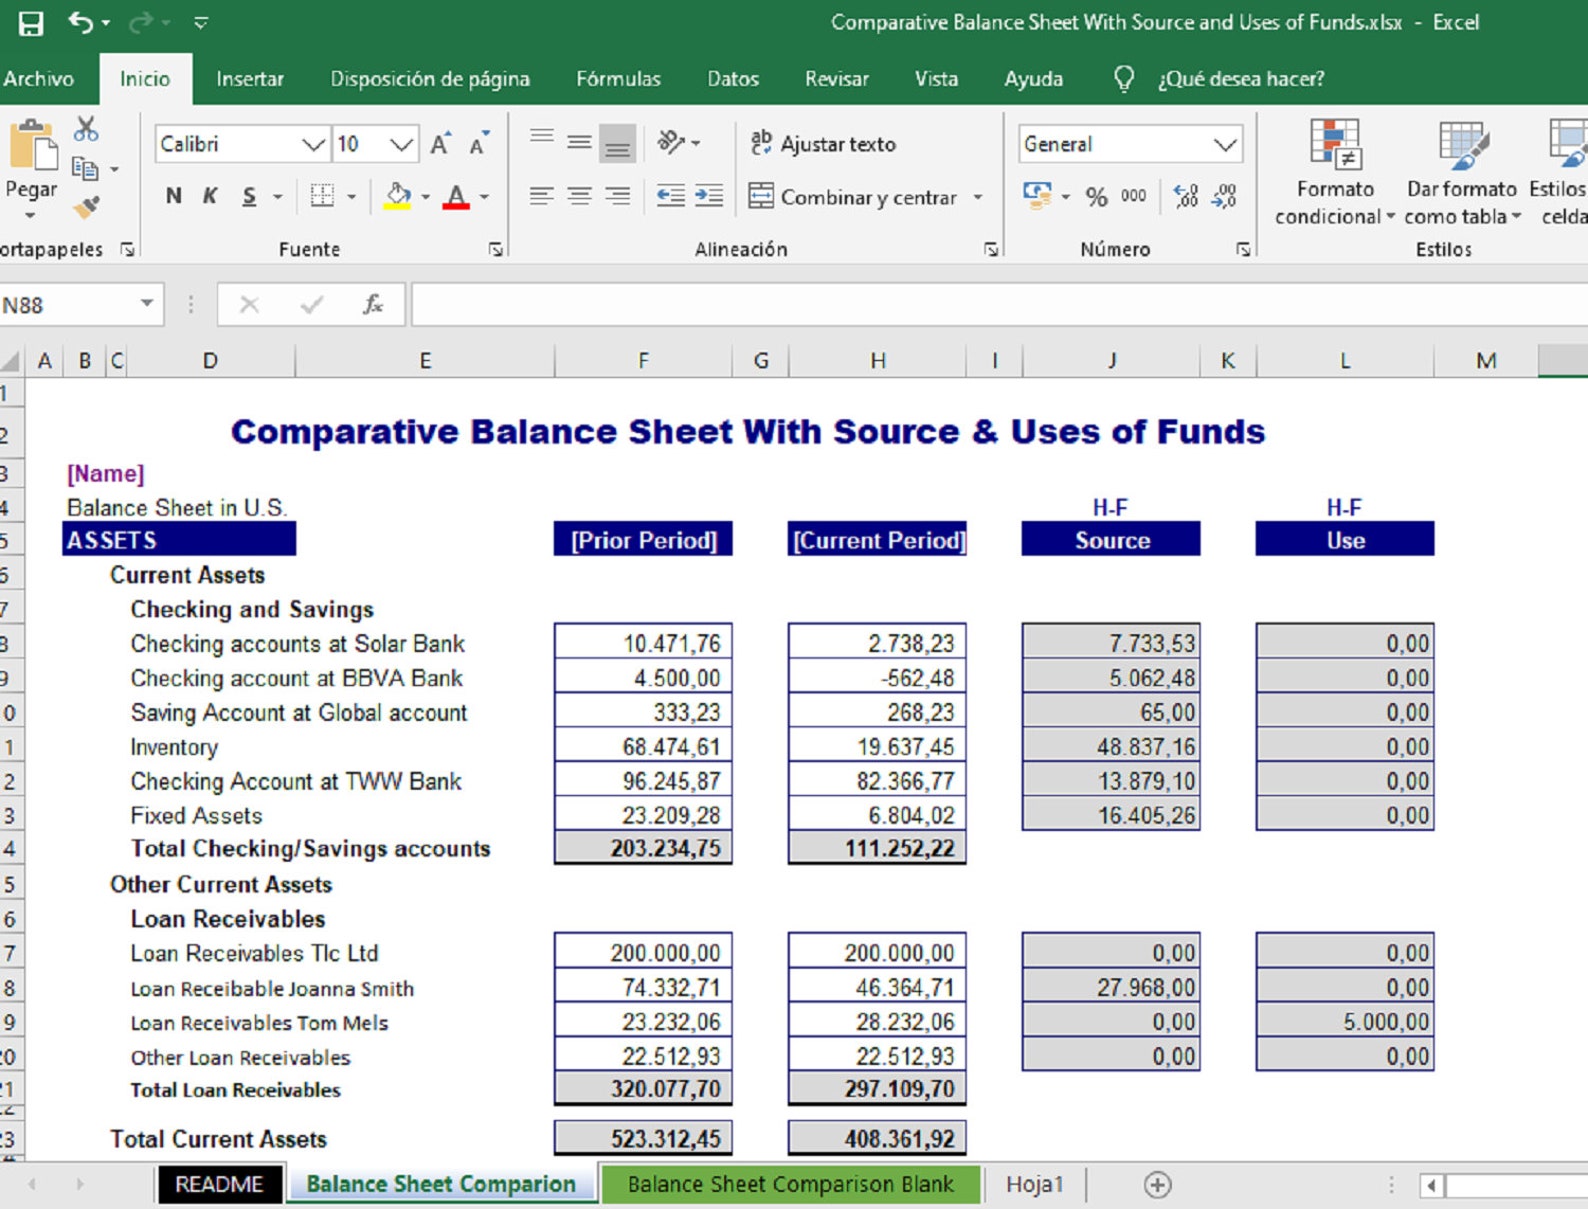 excel-template-statement-of-source-and-use-of-funds-cash-flow-etsy-israel